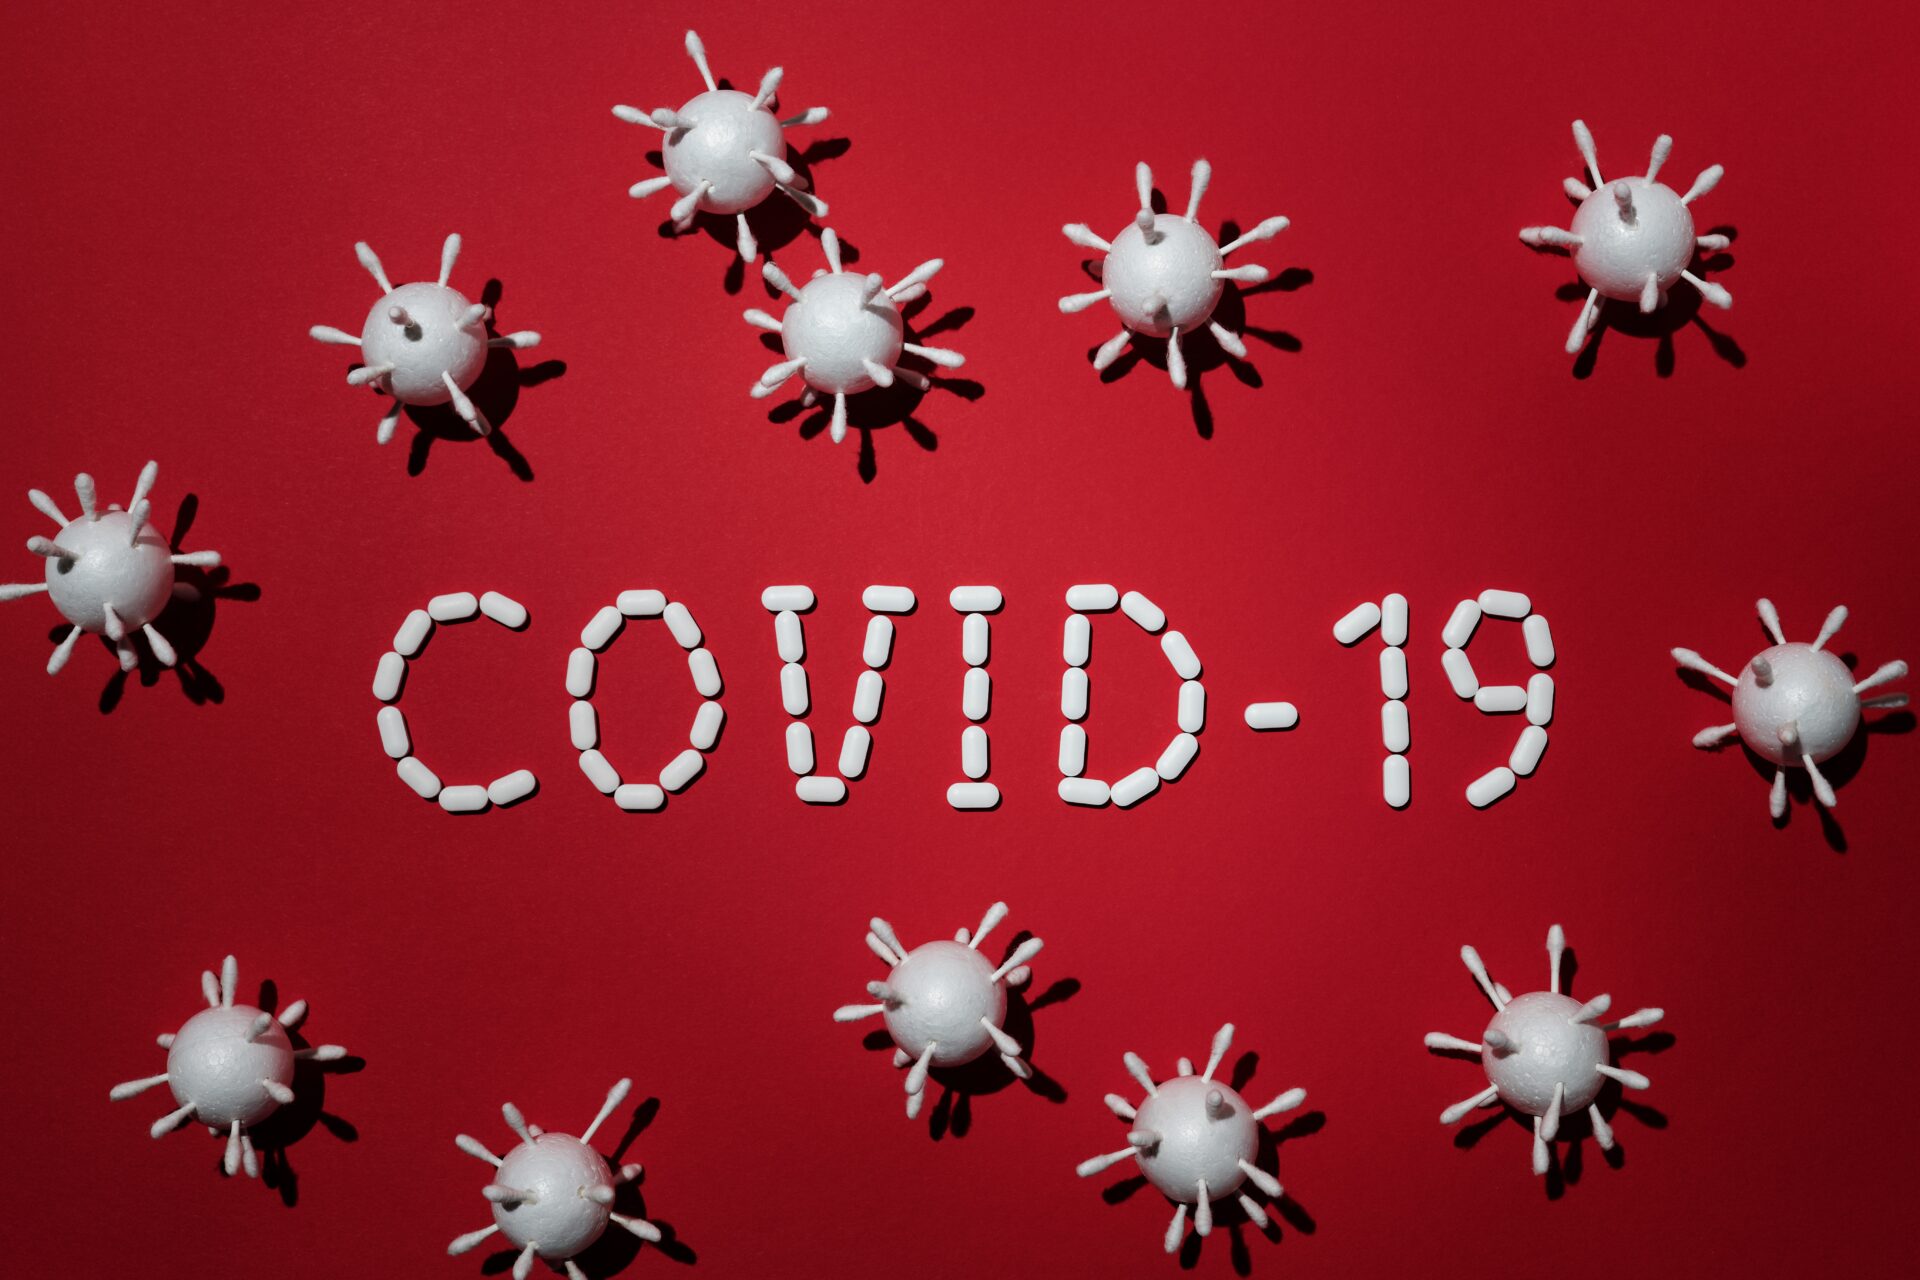 What You Need to Know About a Potential “COVID Pill”.